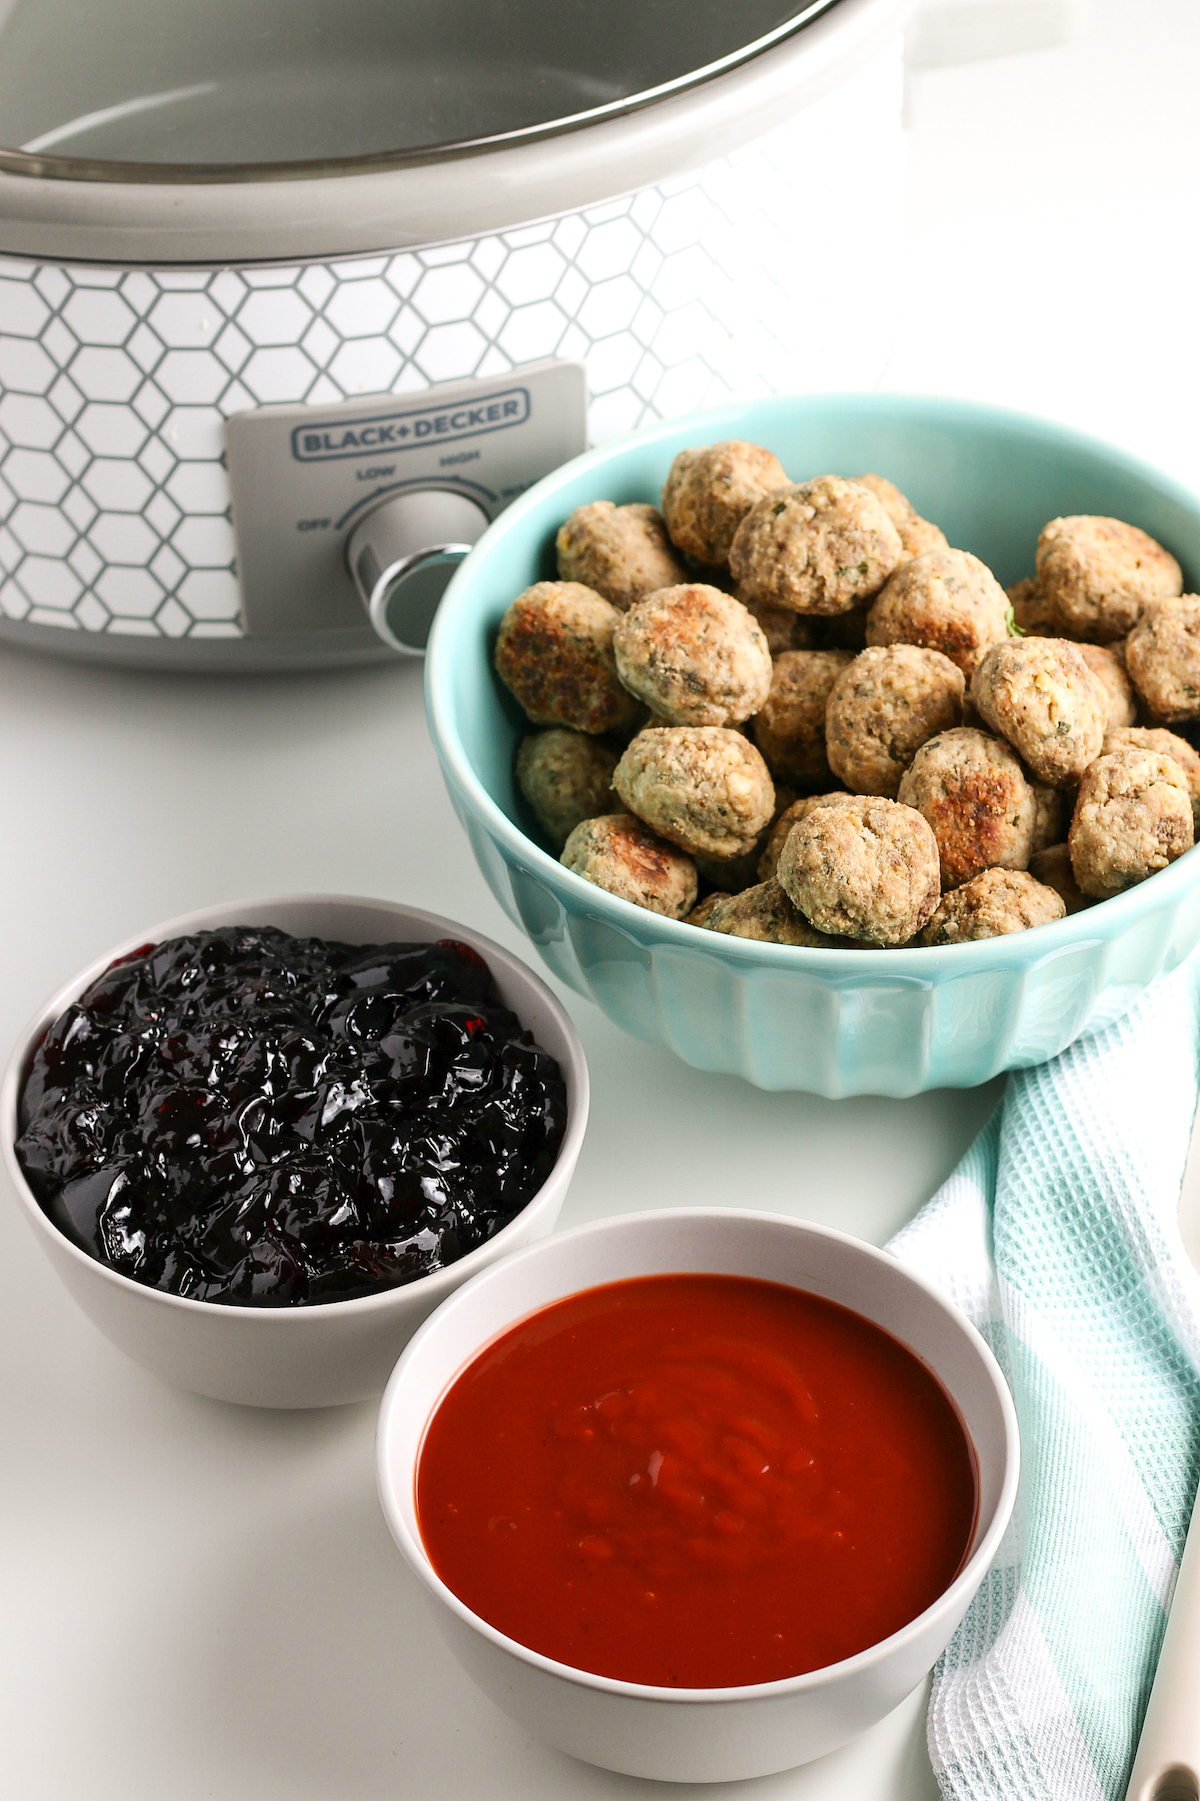 Cooked frozen meatballs, grape jelly, and barbecue sauce, next to a slow cooker.